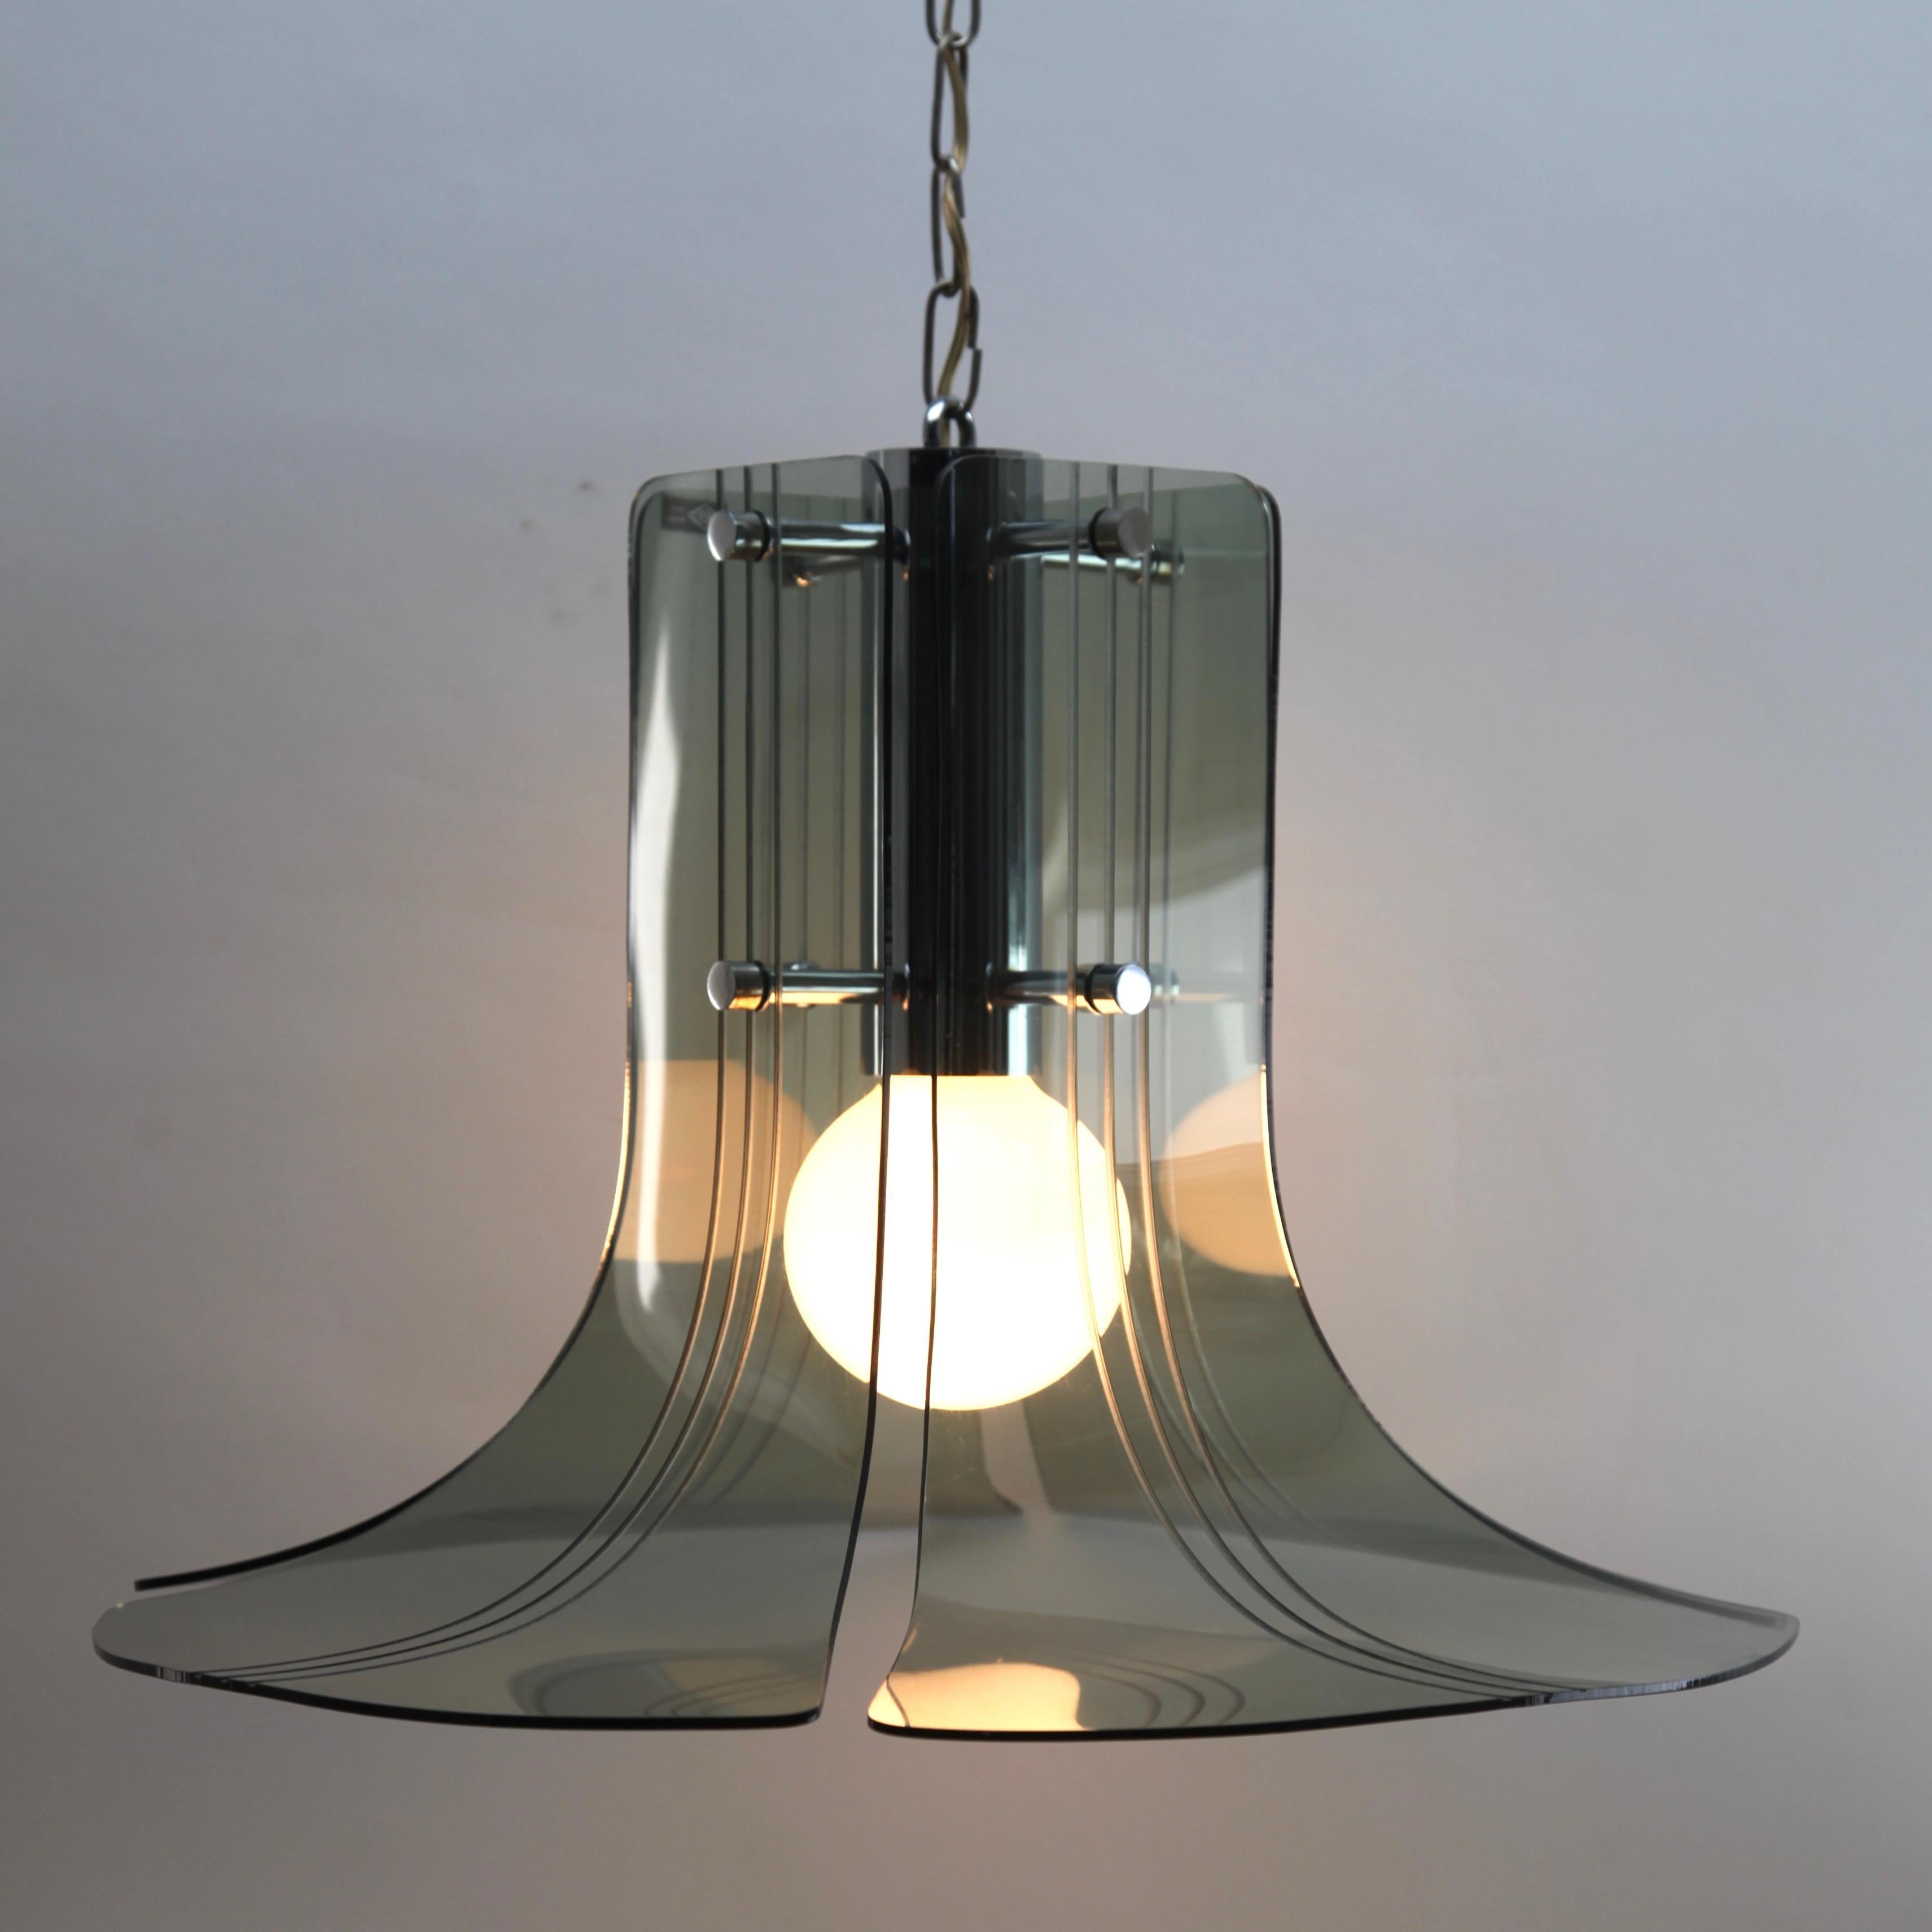 Hand-Crafted Italian Mid-Century Modern Plexs Glass Pendant/Suspension Fixture For Sale